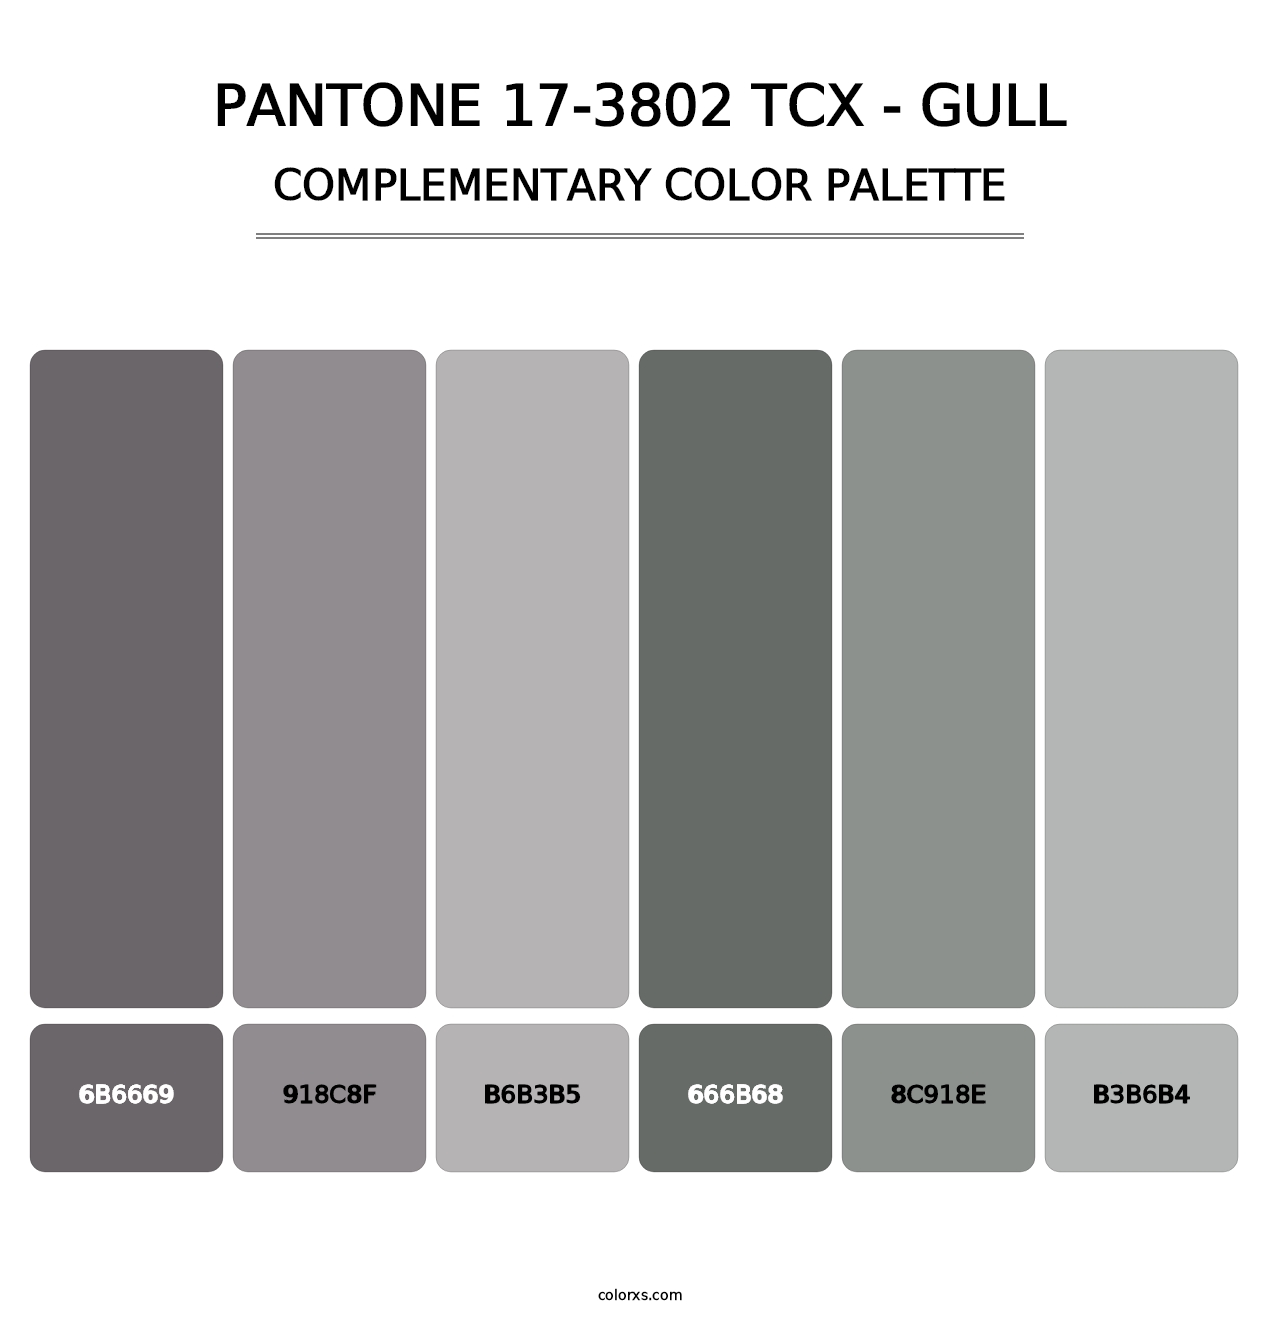 PANTONE 17-3802 TCX - Gull - Complementary Color Palette